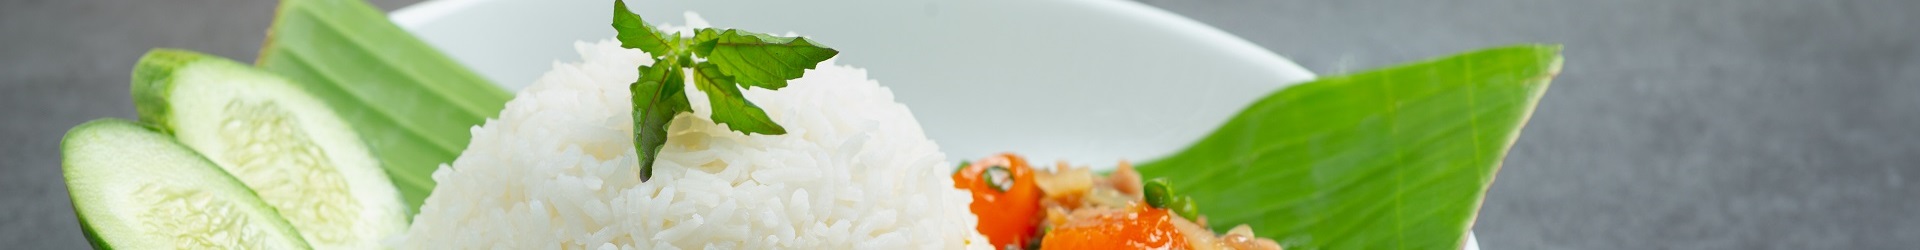 The 5 top tips (and brands) that chefs keep in mind when they choose Basmati rice for their kitchens